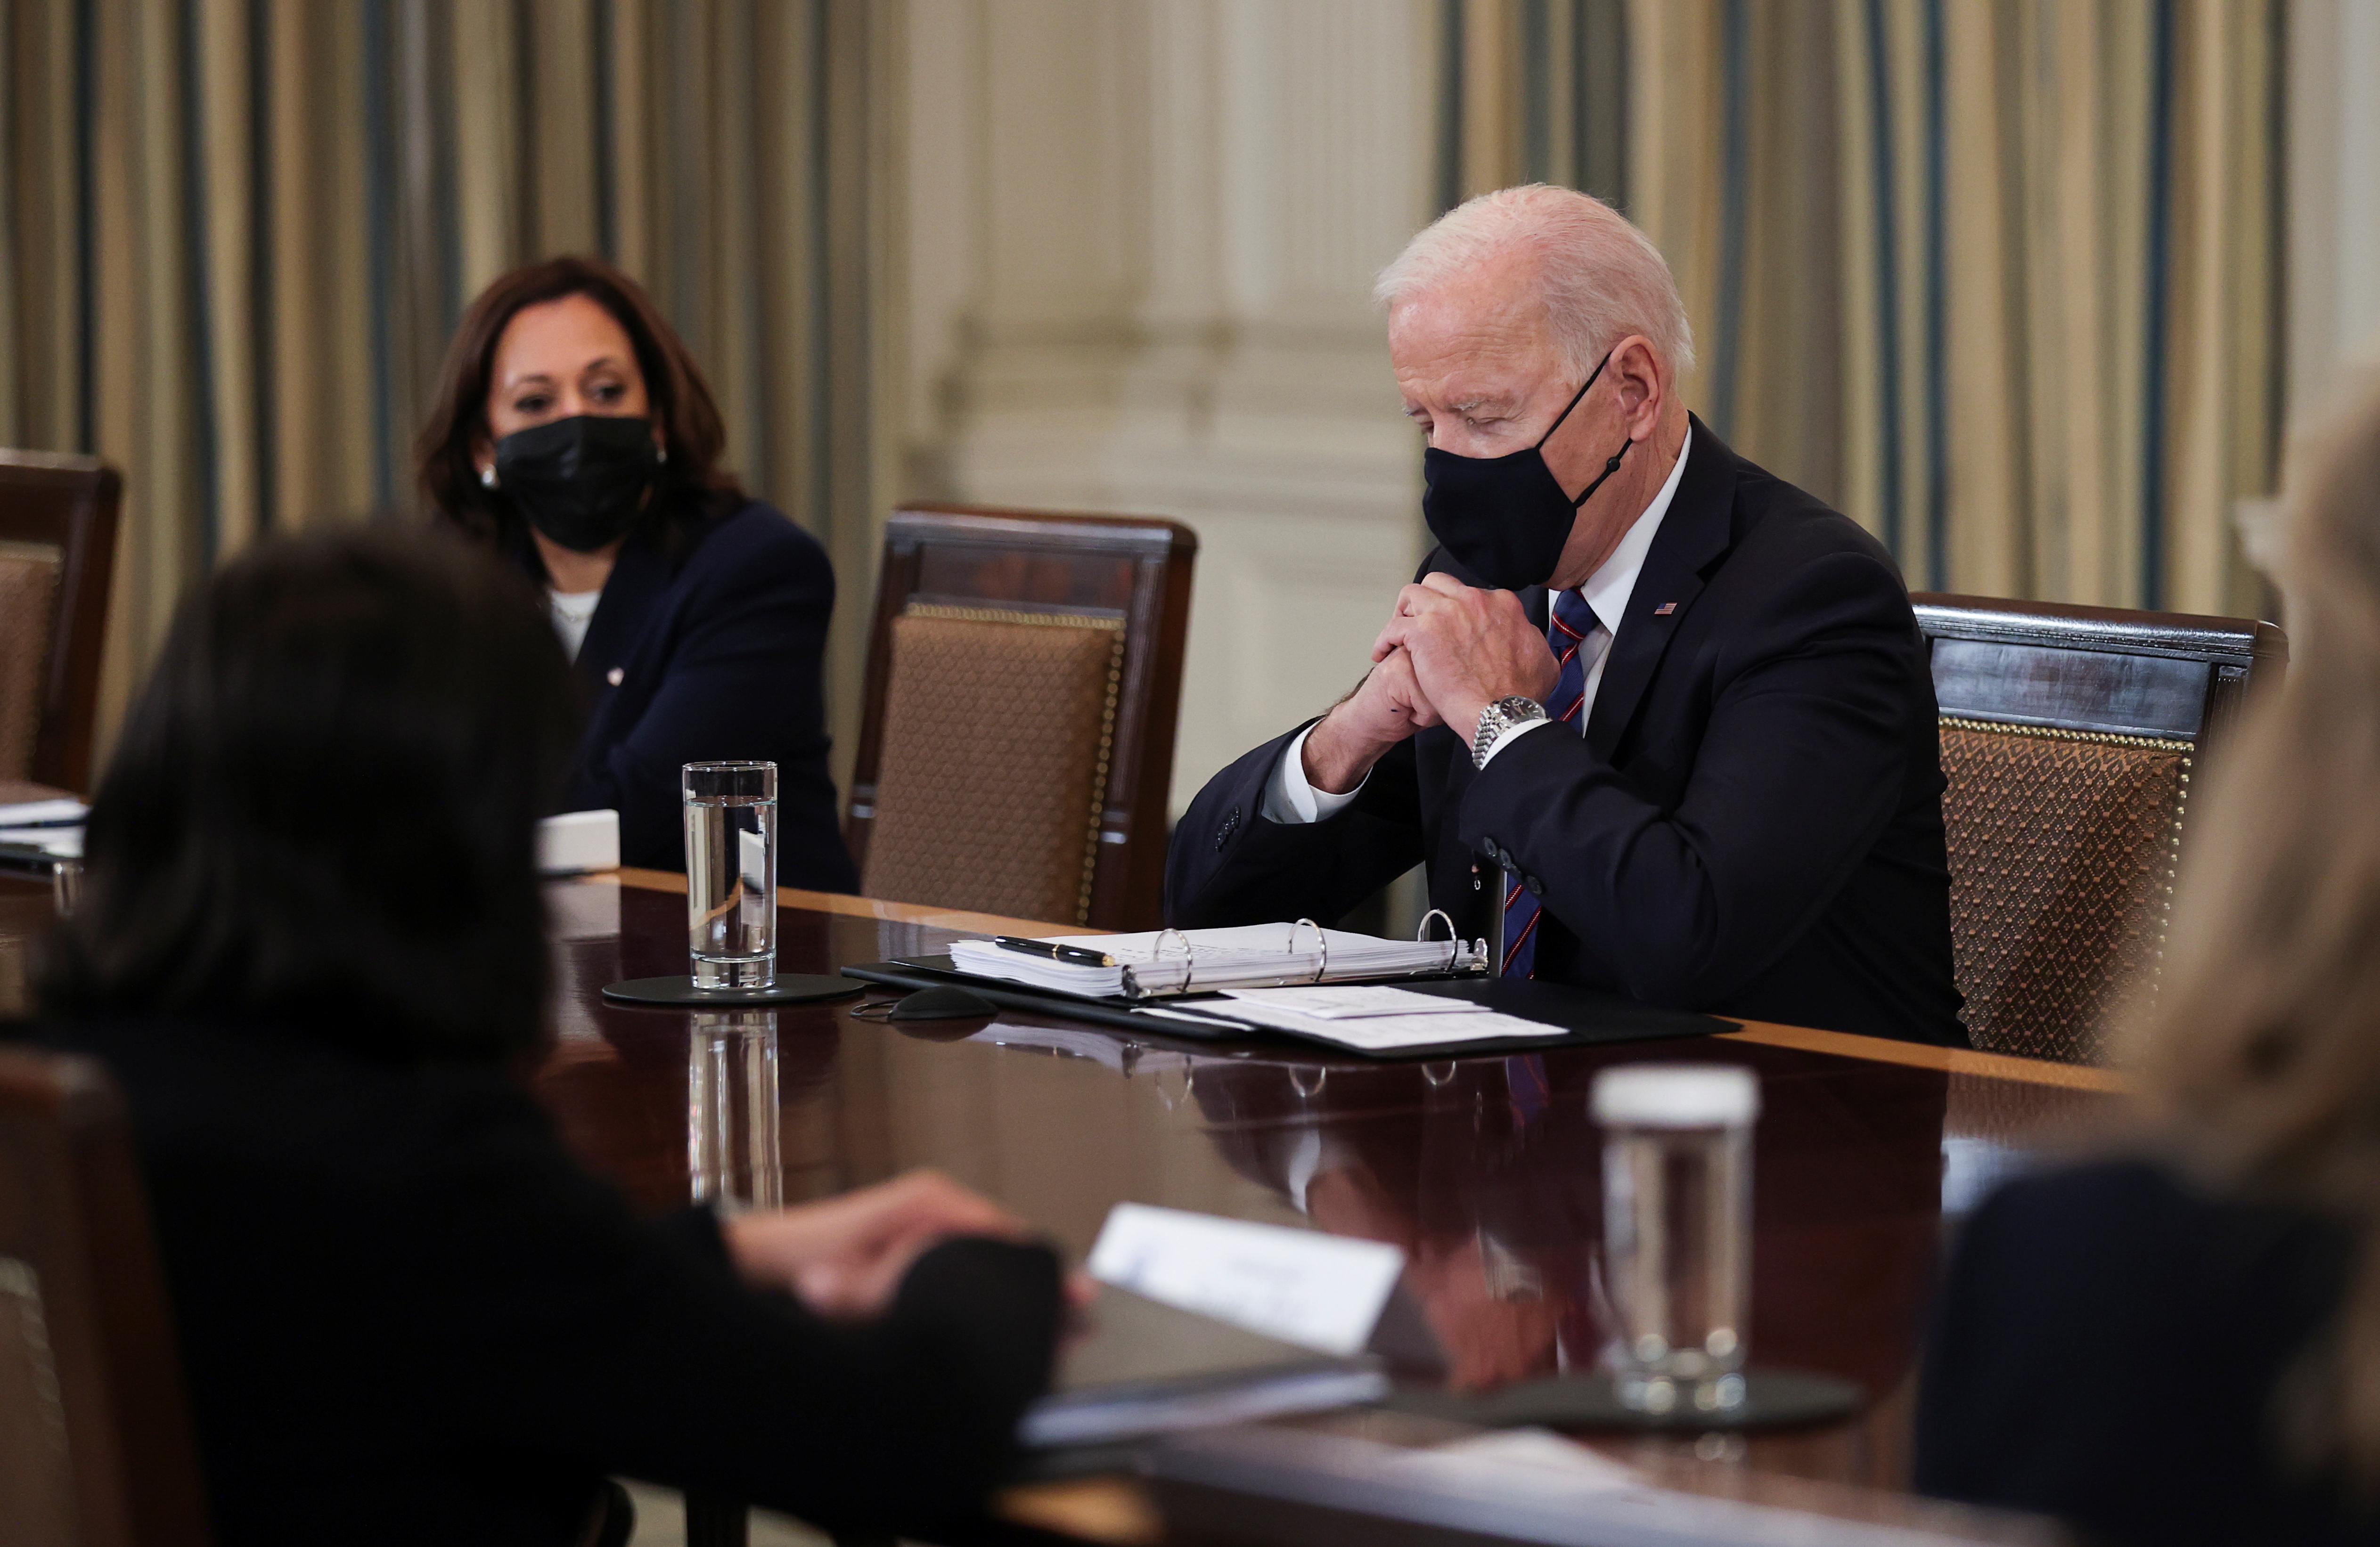 U.S. President Joe Biden meets with immigration advisers at the White House in Washington